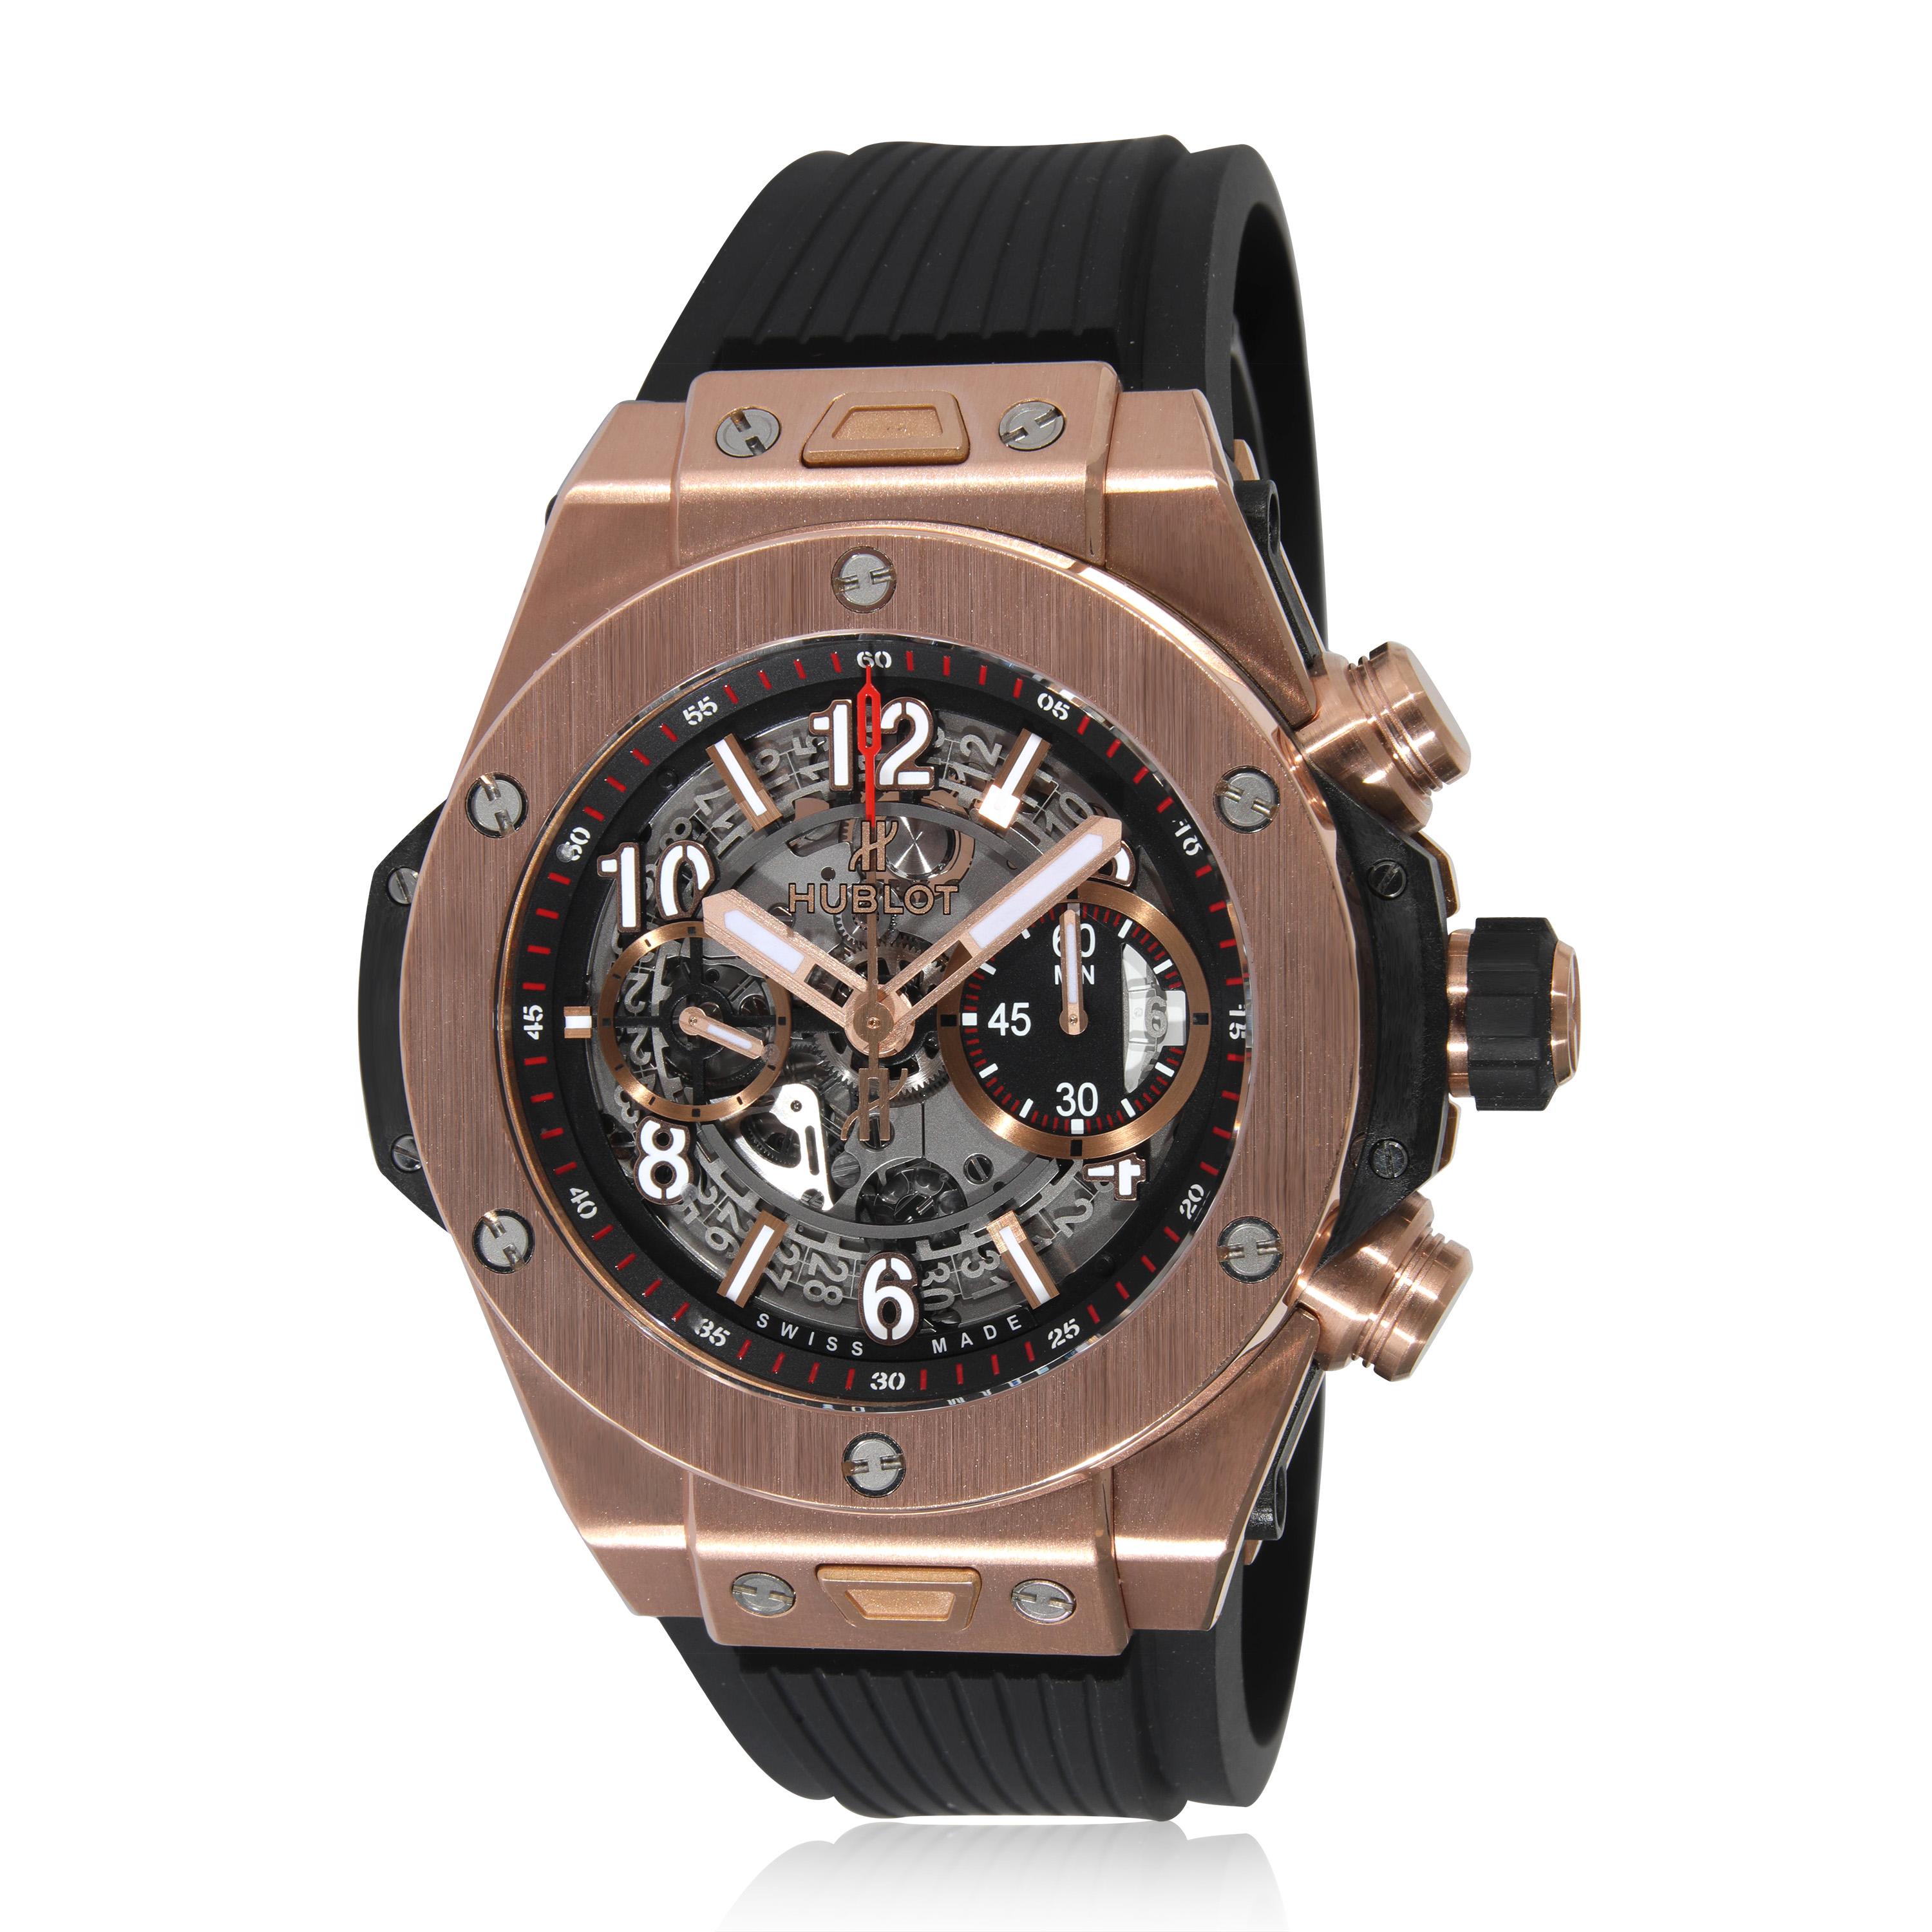 Hublot Big Bang Unico 411.OX.1180.RX Men's Watch in 18kt Titanium/Rose Gold

SKU: 130751

PRIMARY DETAILS
Brand: Hublot
Model: Big Bang Unico
Country of Origin: Switzerland
Movement Type: Mechanical: Automatic/Kinetic
Year Manufactured: 2016
Year of